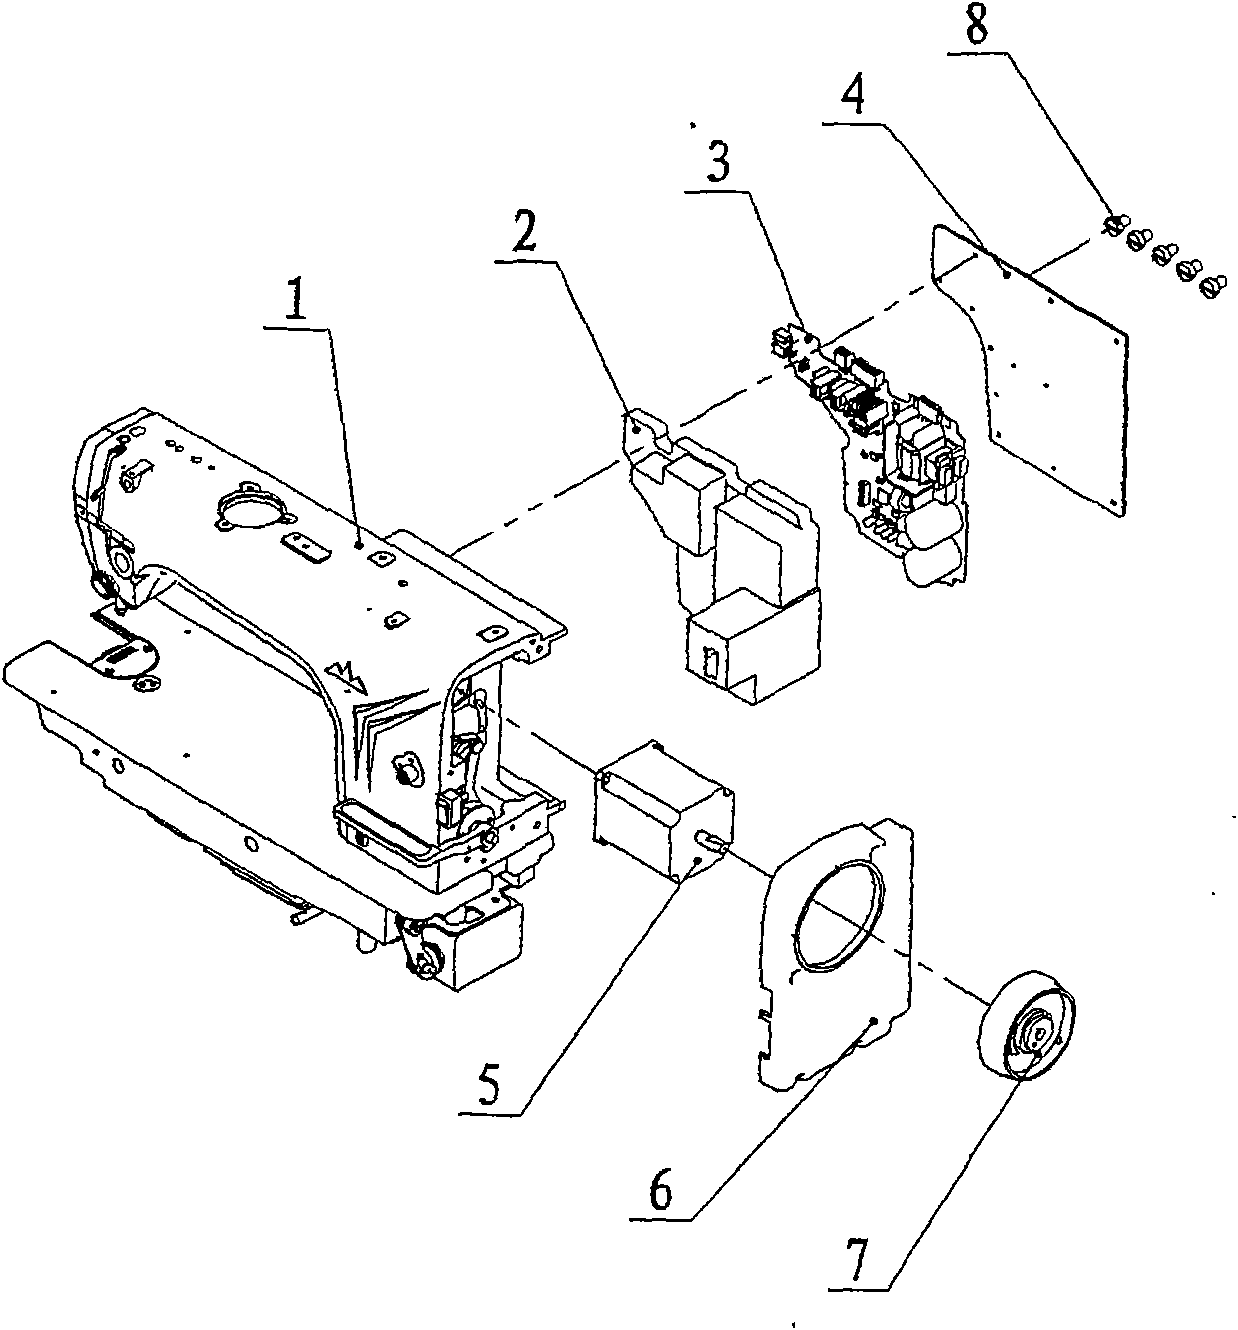 Electromechanically integrated industrial sewing machine